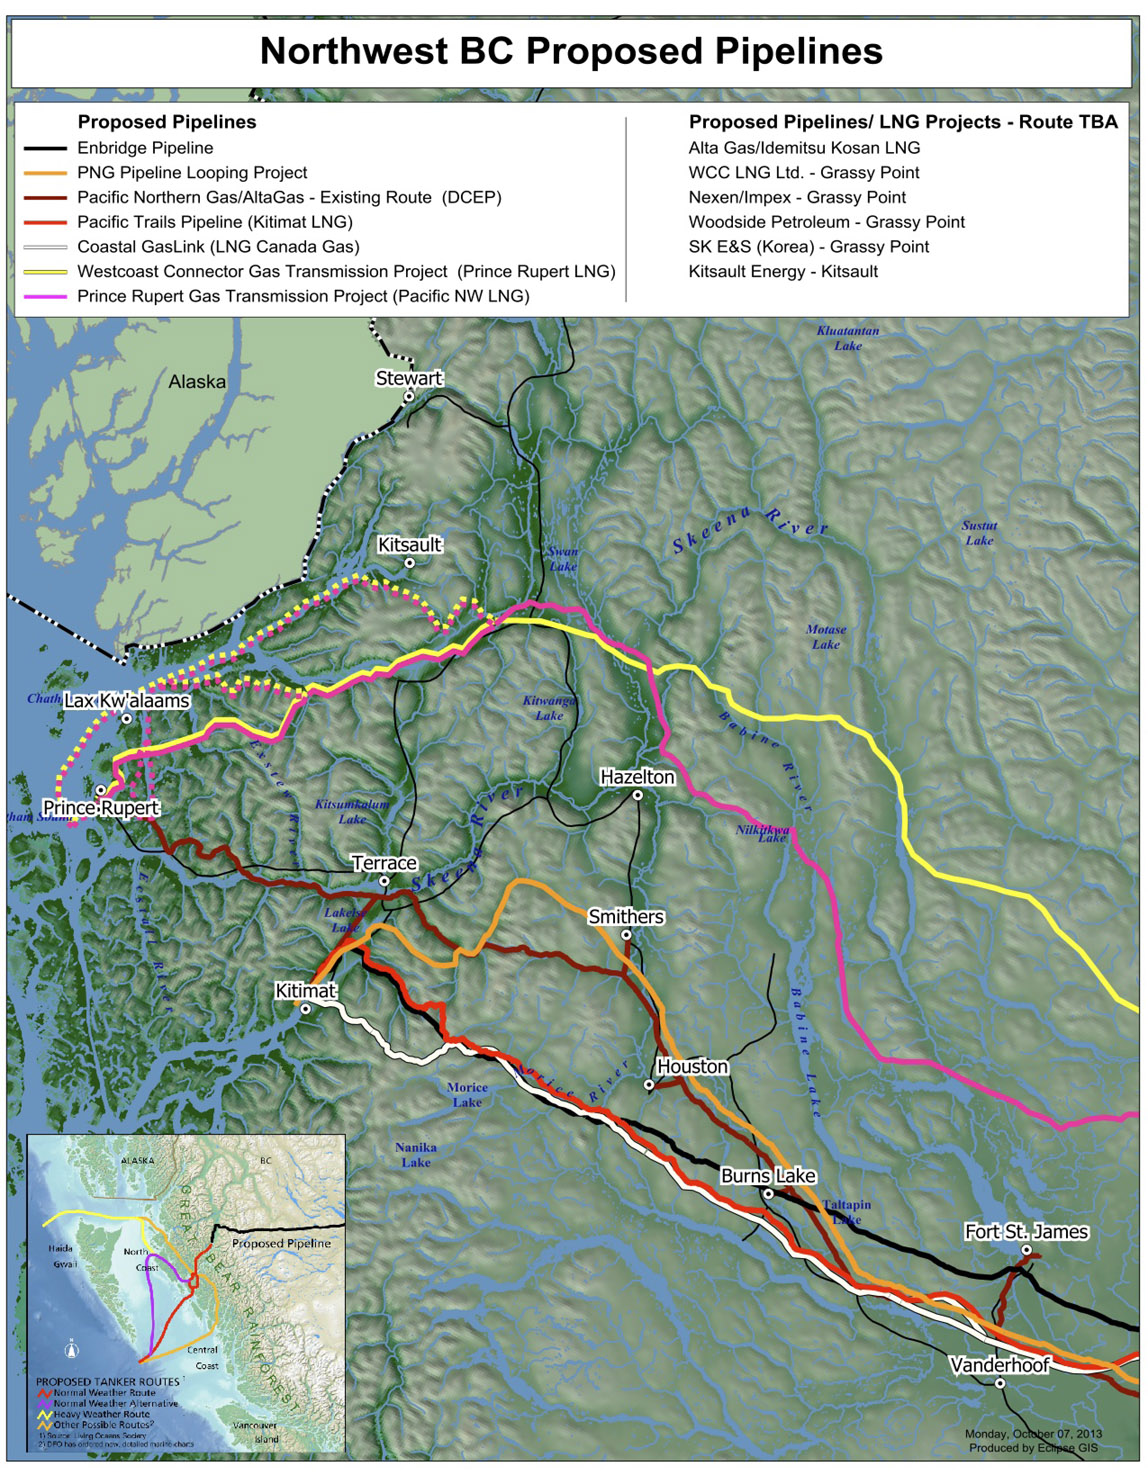 map-shows-multiple-proposed-oil-gas-pipelines-in-bc-s-carbon-corridor